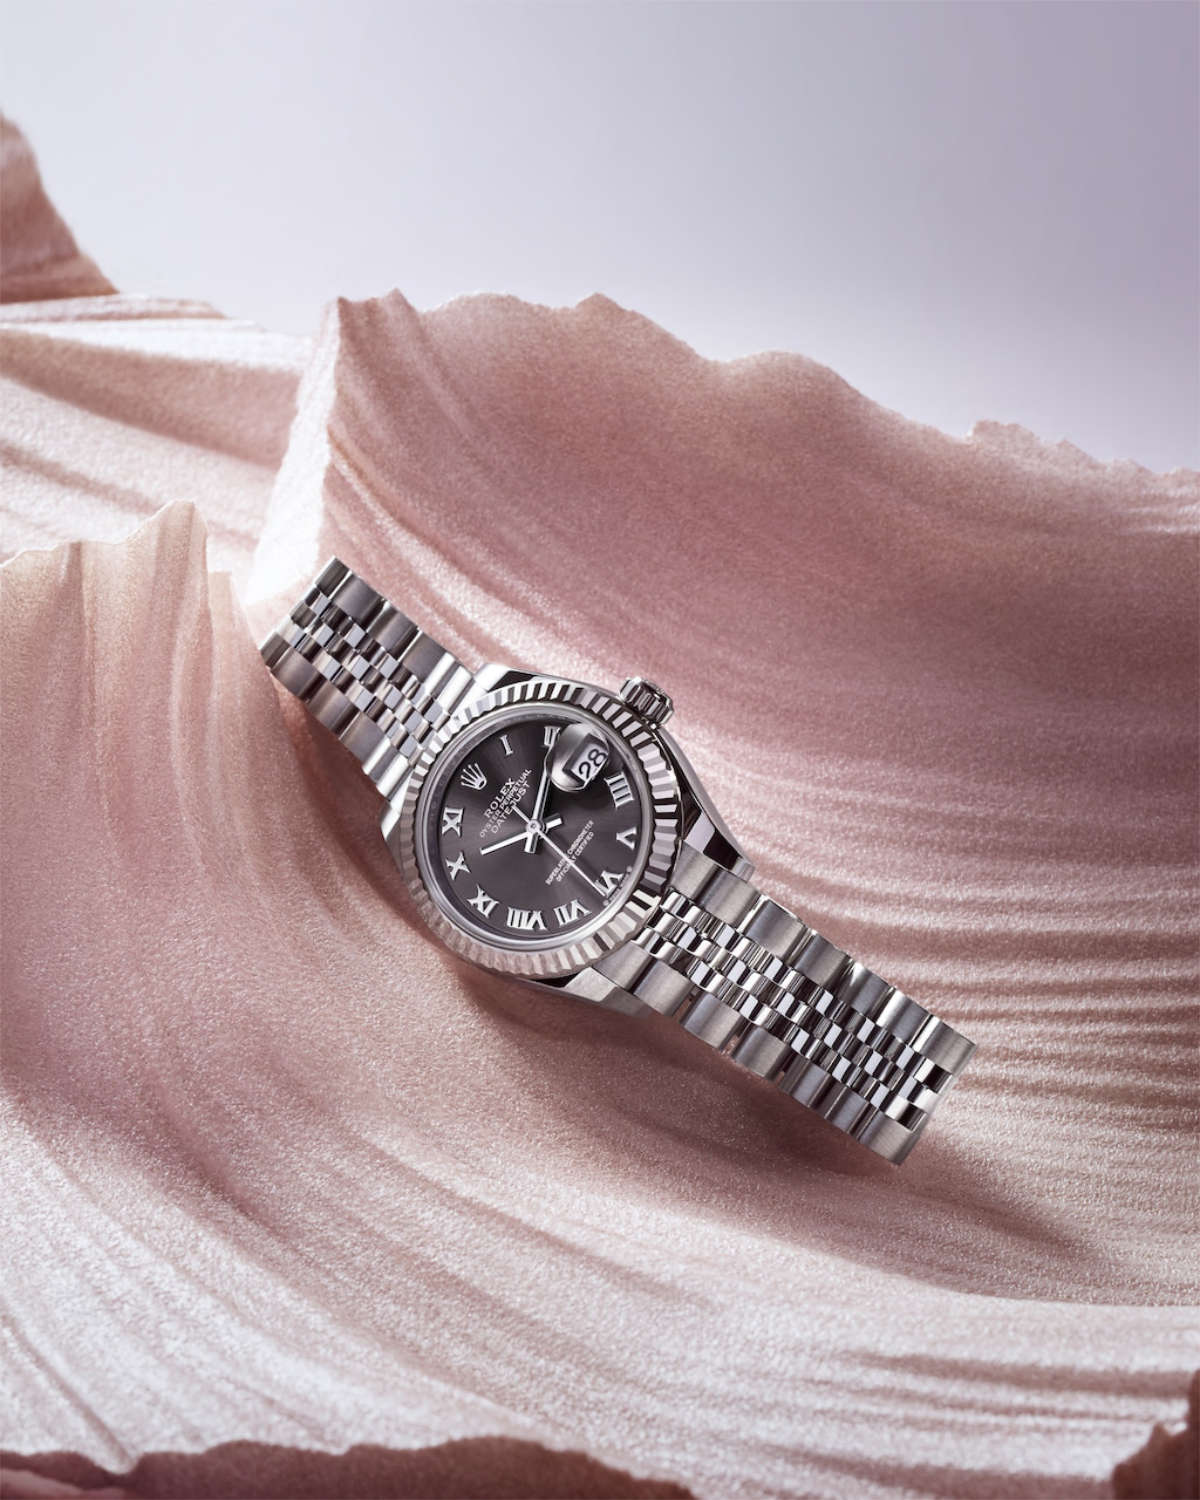 Rolex's Oyster Perpetual Lady-Datejust: The Audacity Of Excellence